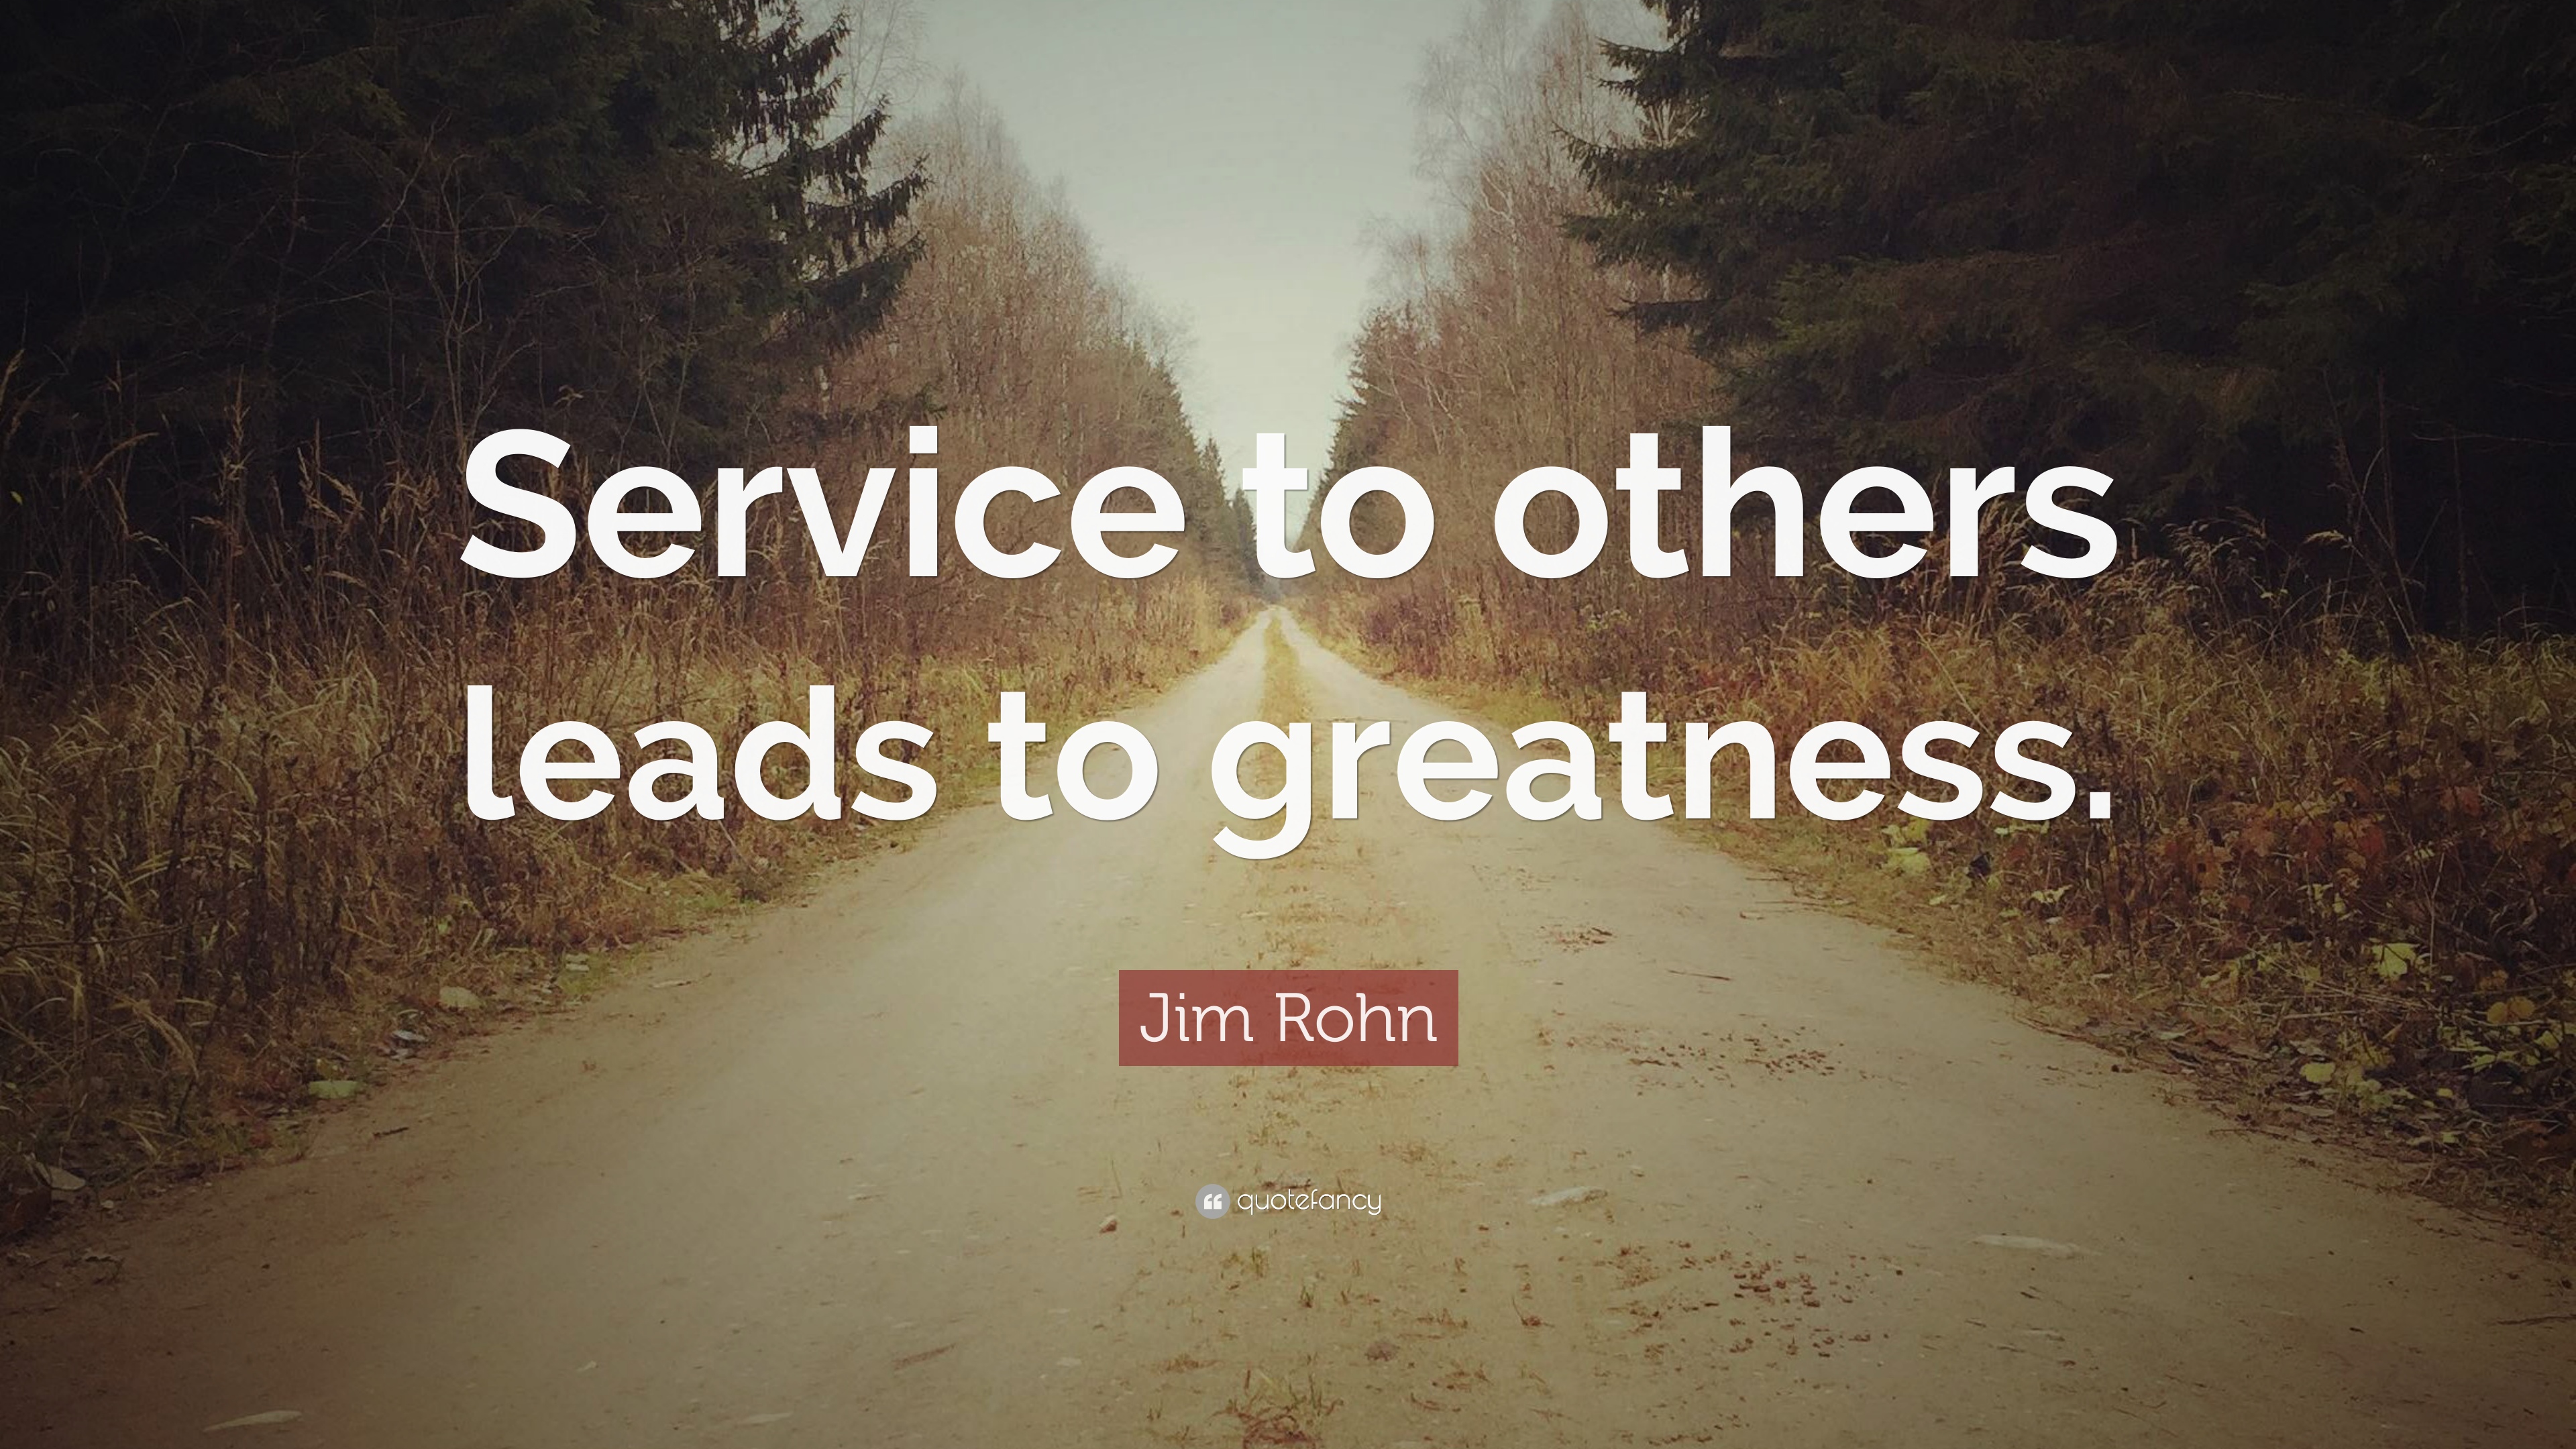 Service to others leads to greatness. Jim Rohn